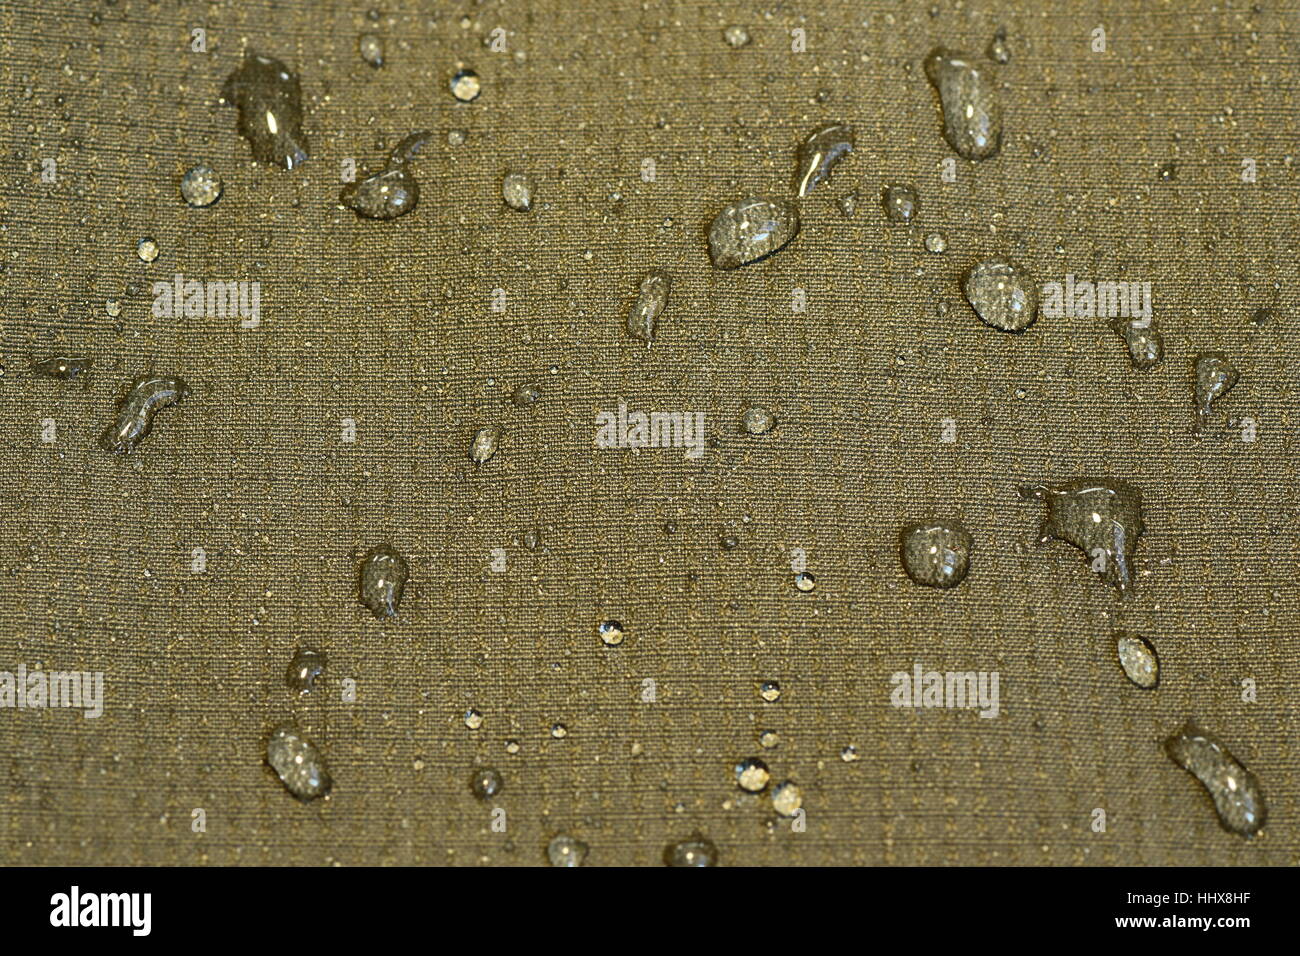 detail of water repellent green material with drops Stock Photo